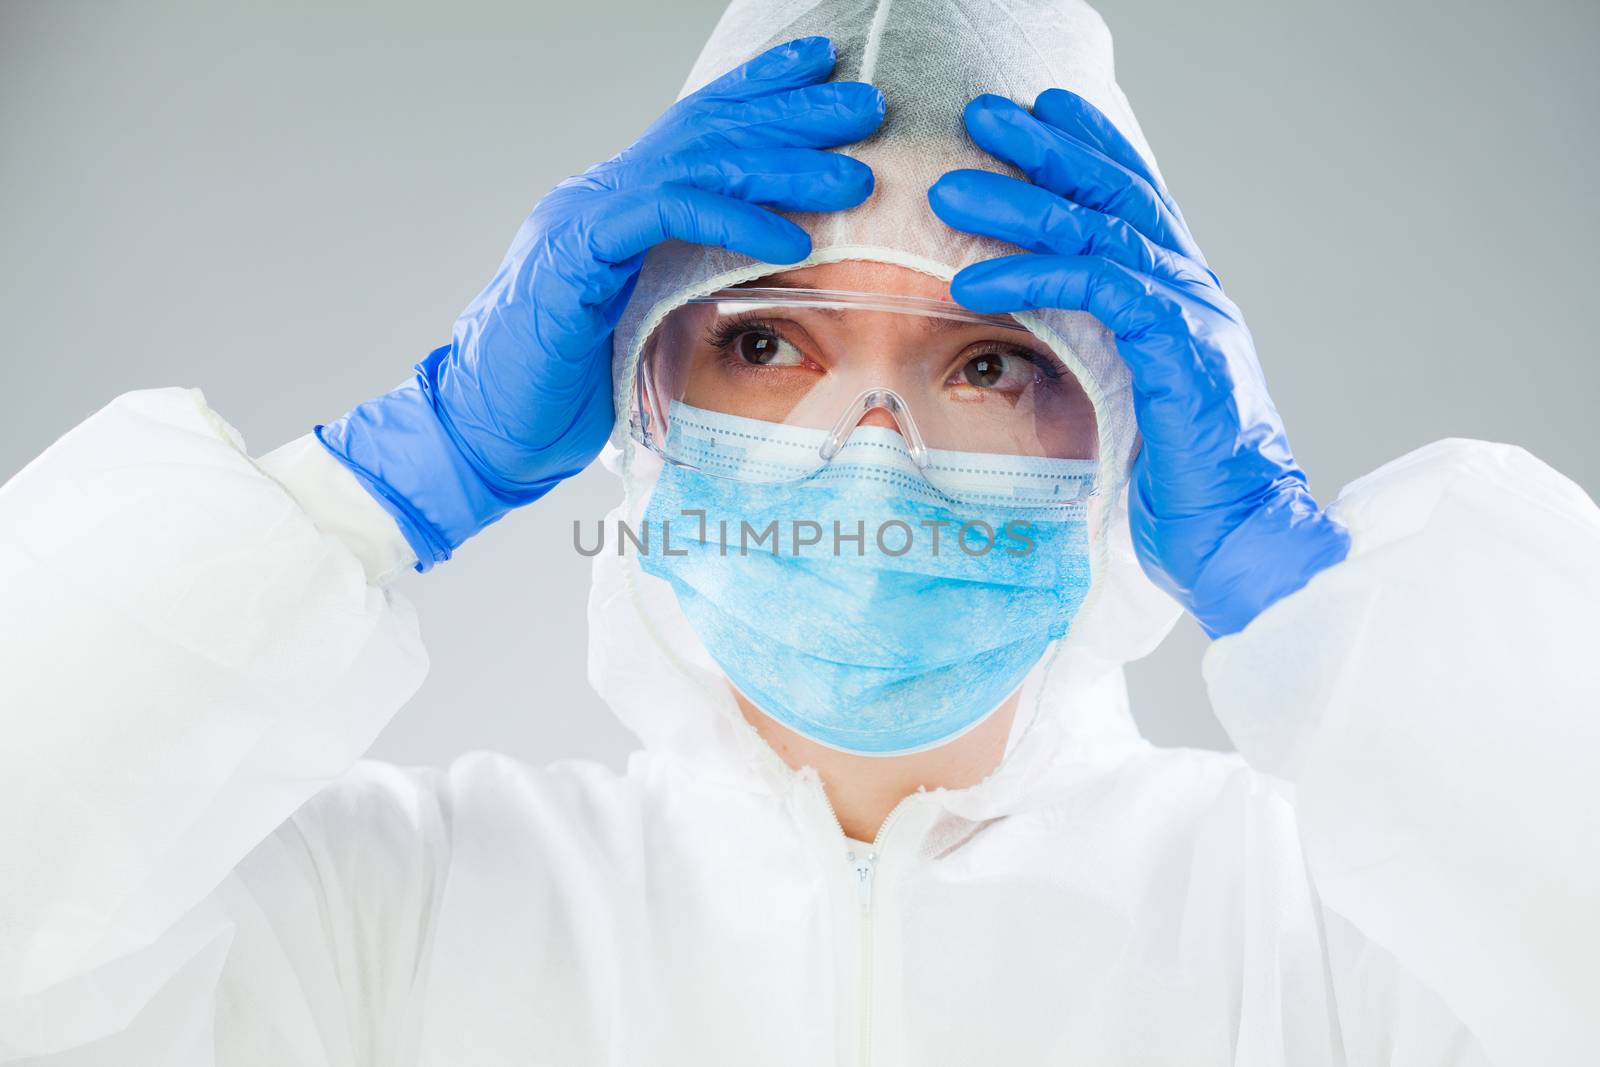 Desperate medical NHS EMS worker in white protective suit,blue surgical mask latex gloves & safety goggles,Coronavirus COVID-19 pandemic crisis causing shortage of protective personal equipment supply